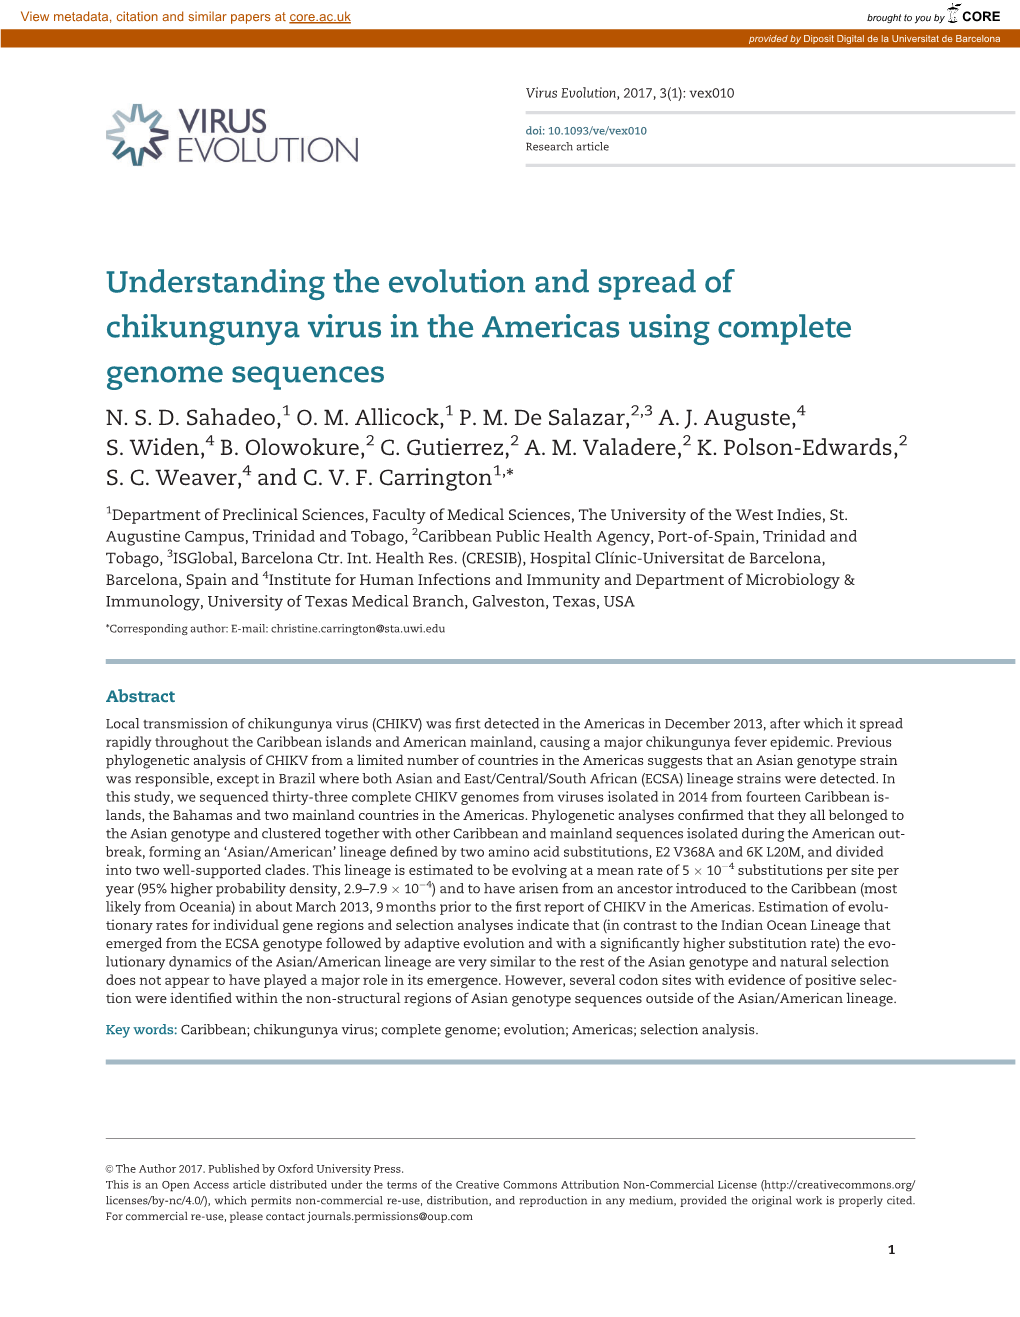 Understanding the Evolution and Spread of Chikungunya Virus in the Americas Using Complete Genome Sequences N